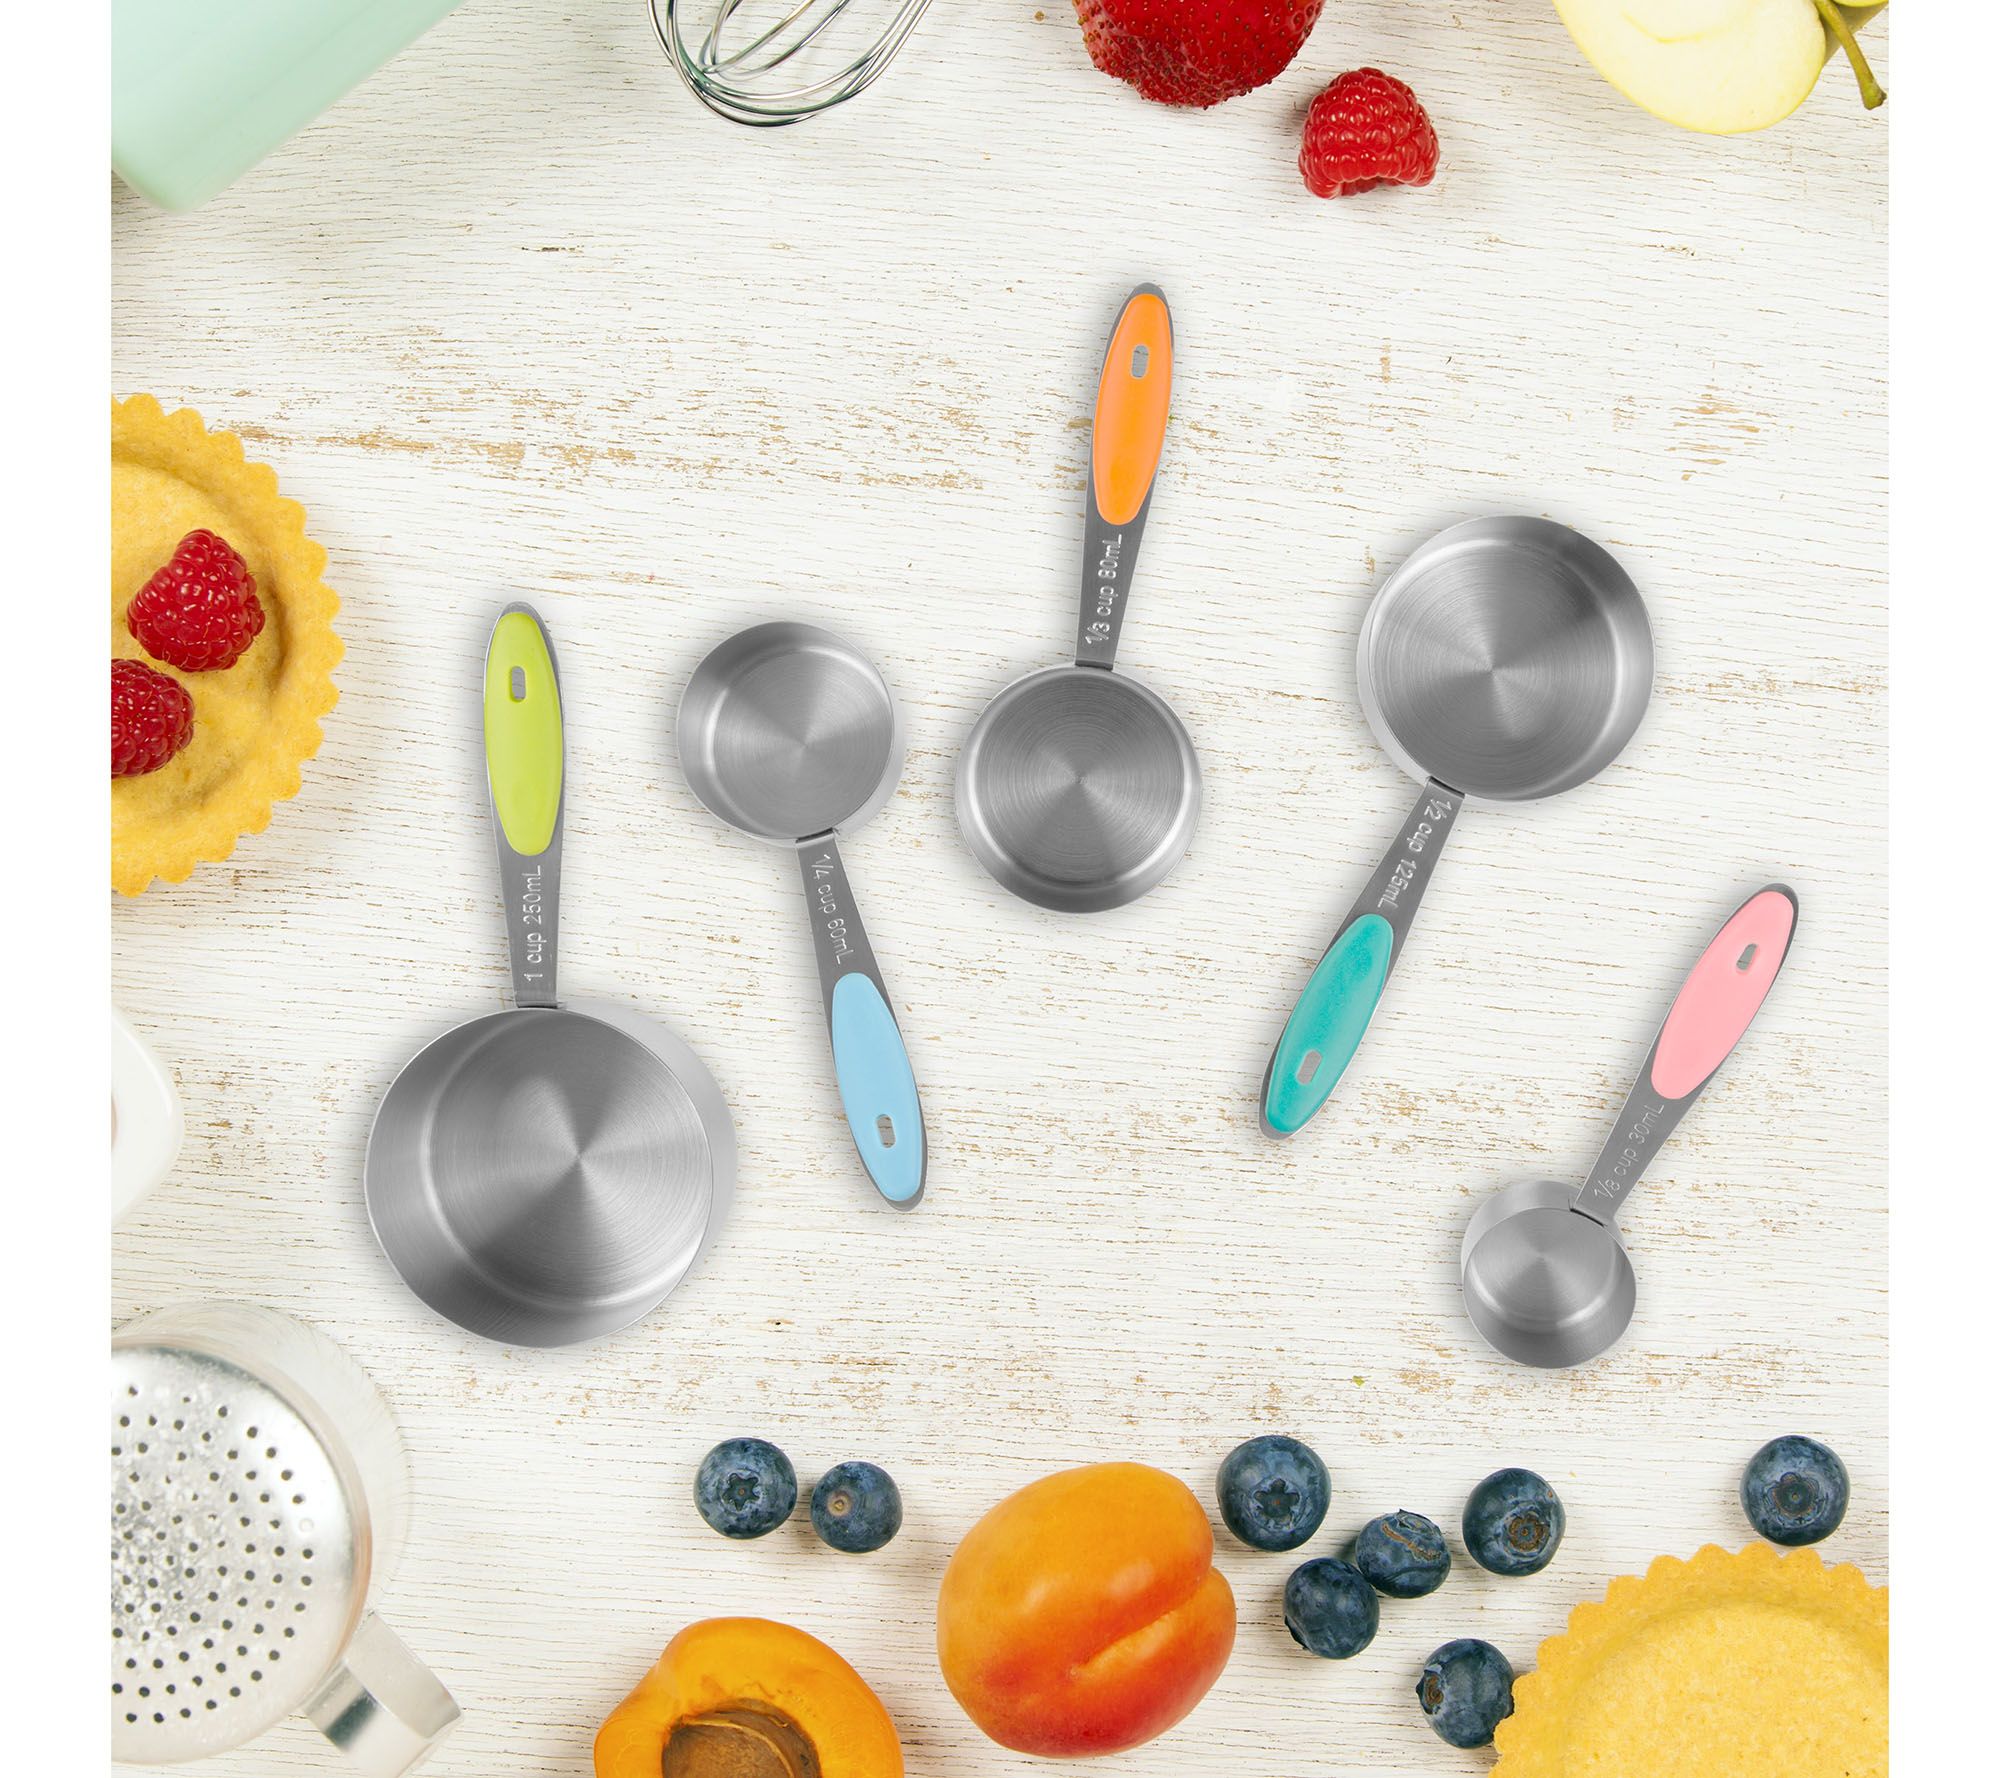 Temp-tations Classic 10-Piece Measuring Cup and Spoon Set 